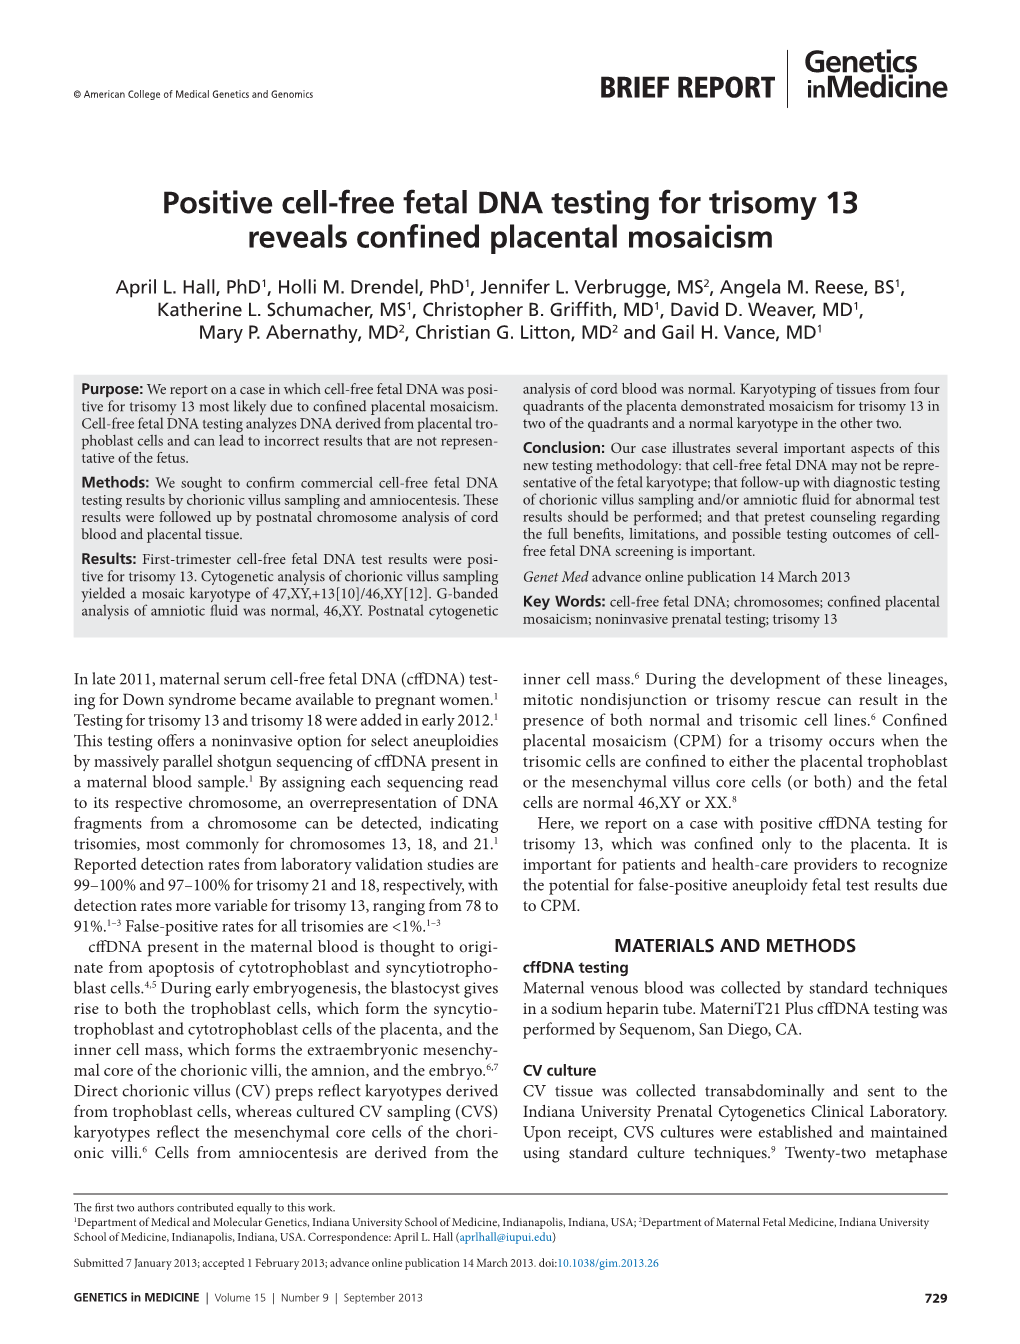 Positive Cell-Free Fetal DNA Testing for Trisomy 13 Reveals Confined Placental Mosaicism